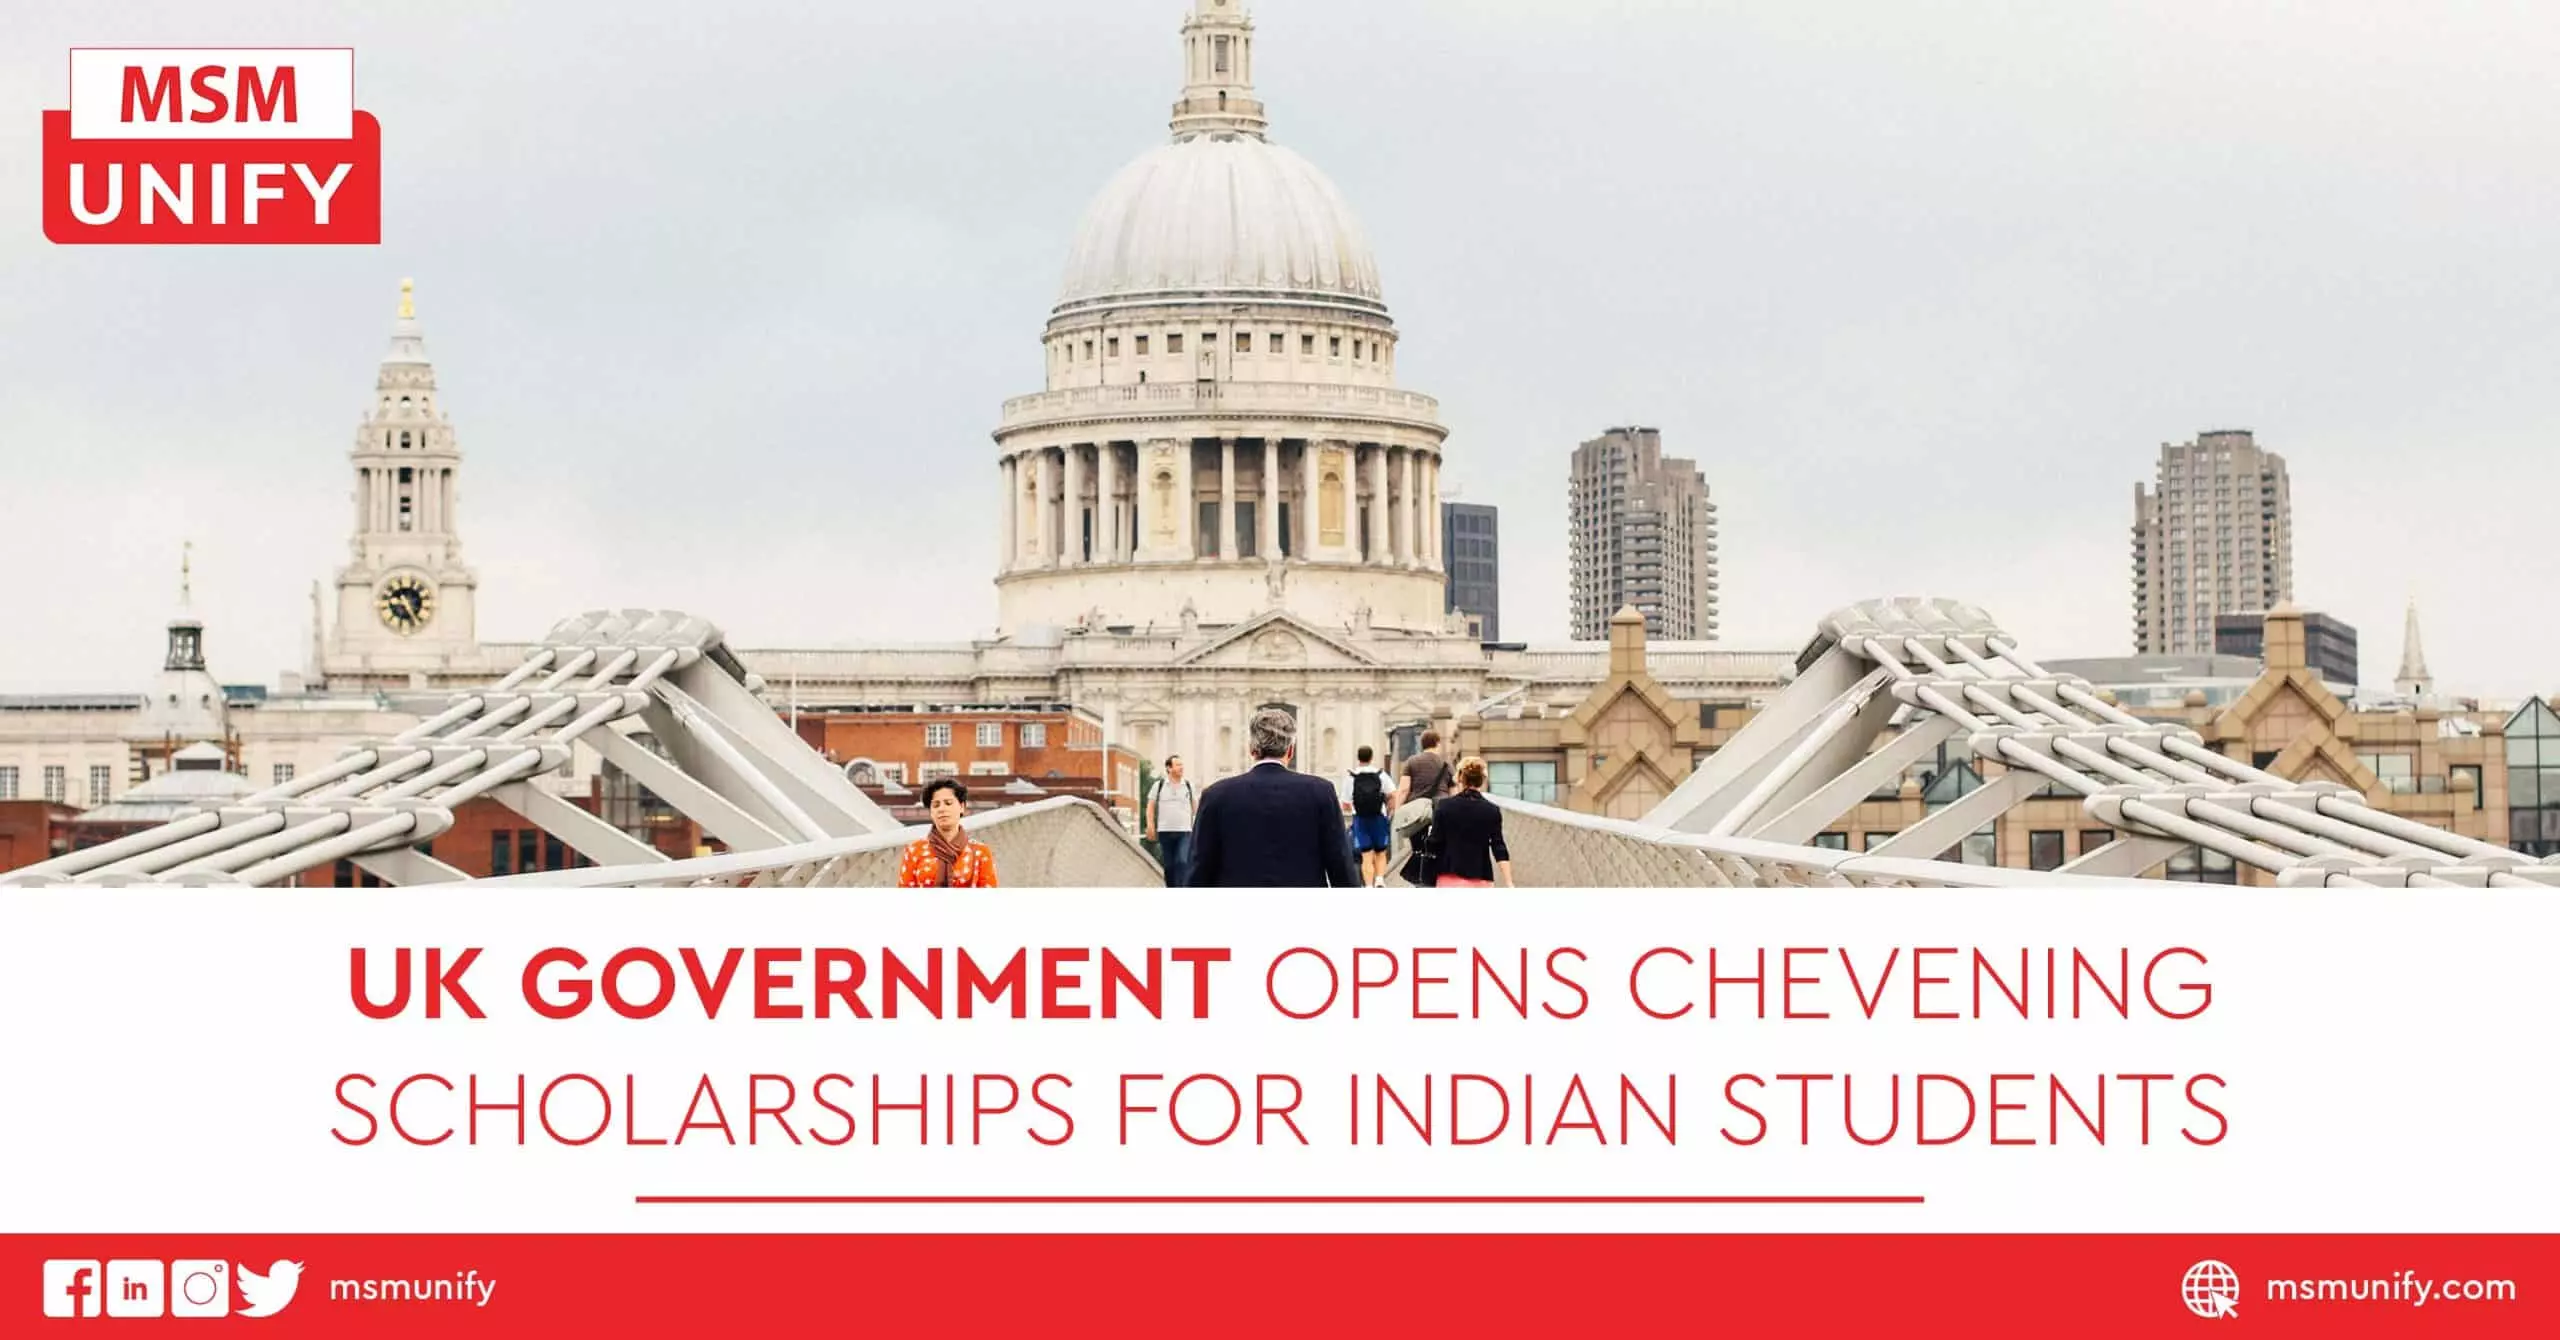 UK Government Opens Chevening Scholarships for Indian Students scaled 1